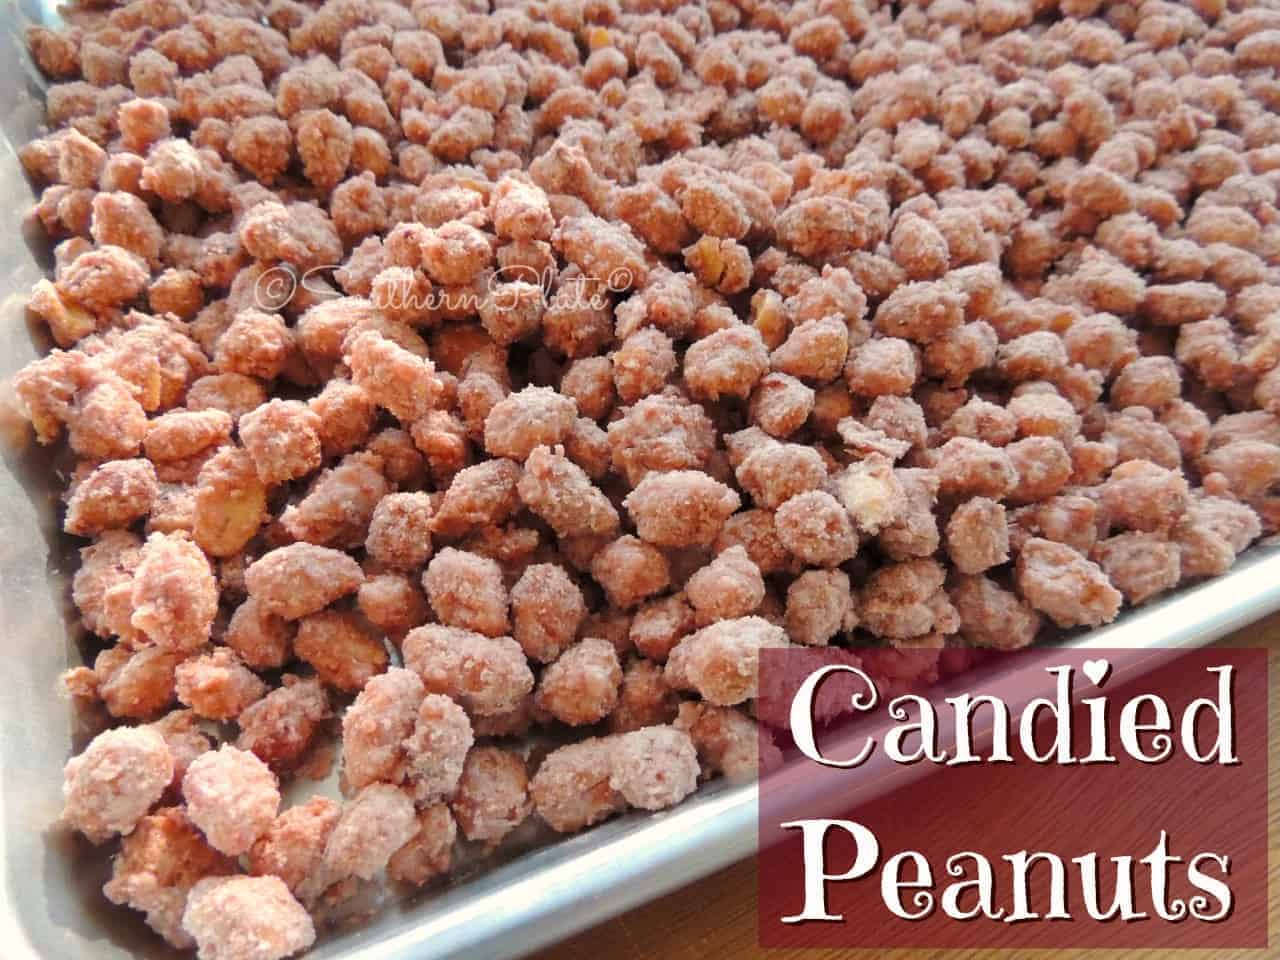 Candied Peanuts (2 Ingredients Only)